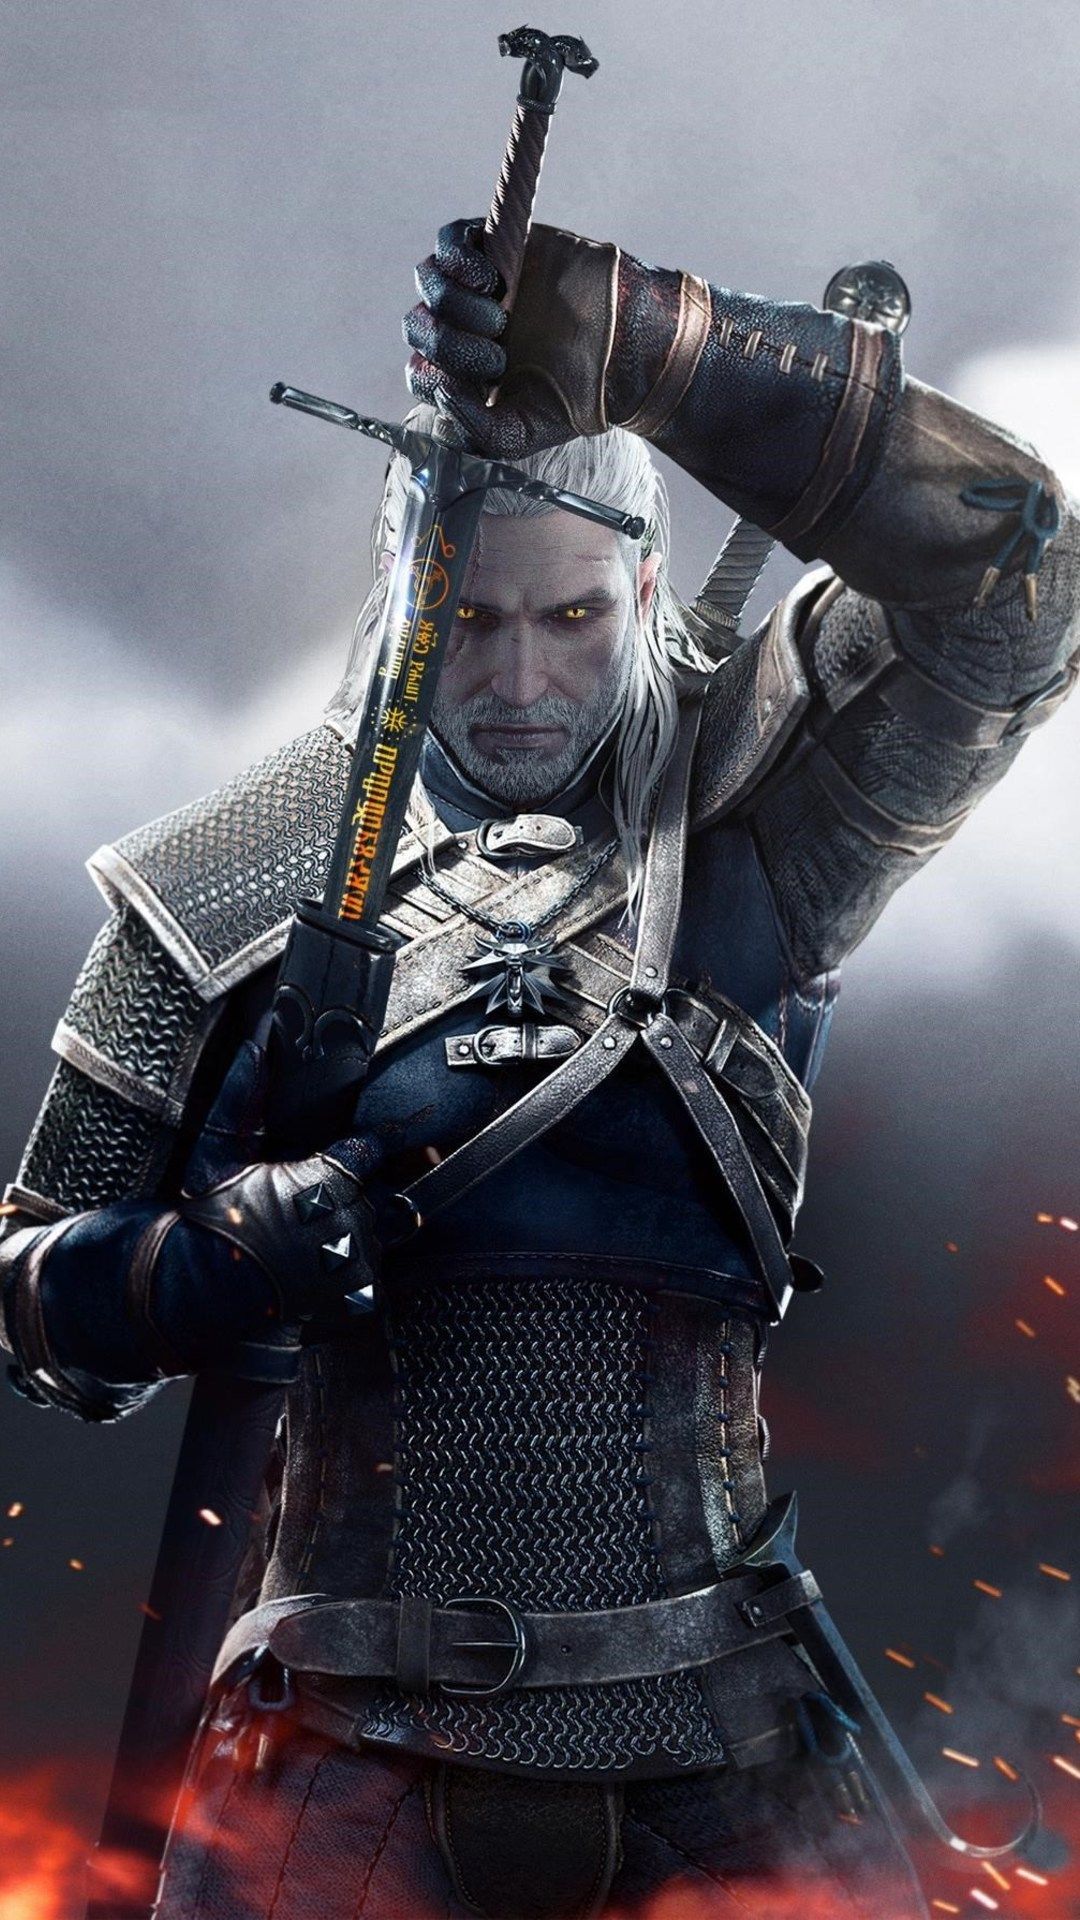 Desktop Wallpaper The Witcher 3 Wild Hunt Game Hd Image Picture  Background 0vrqfd